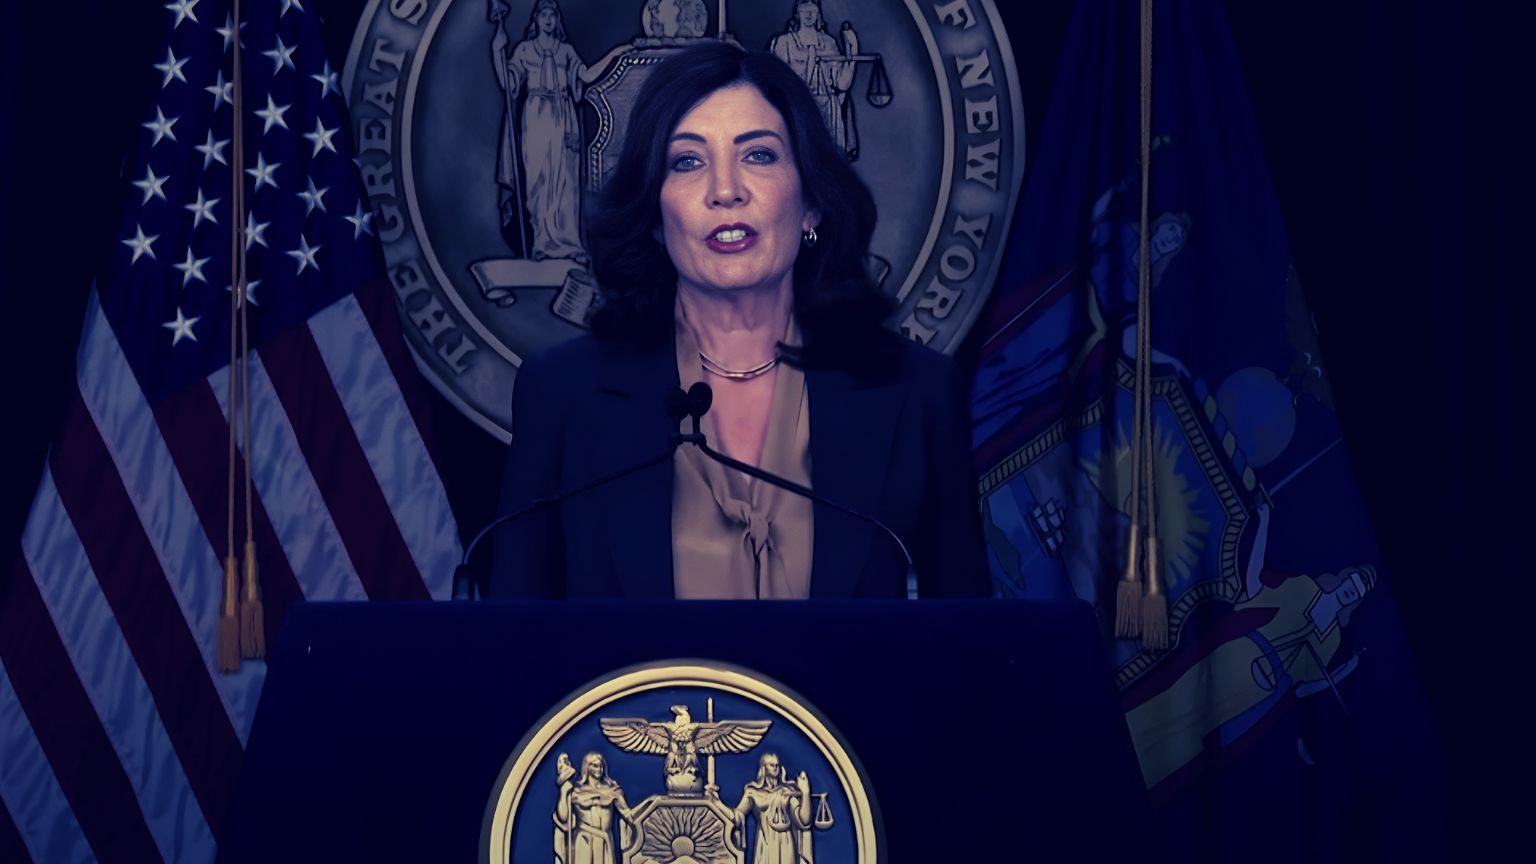 Governor Kathy Hochul Says New York Has Started Conducting Special Media “Surveillance Efforts” To Monitor “Hate”